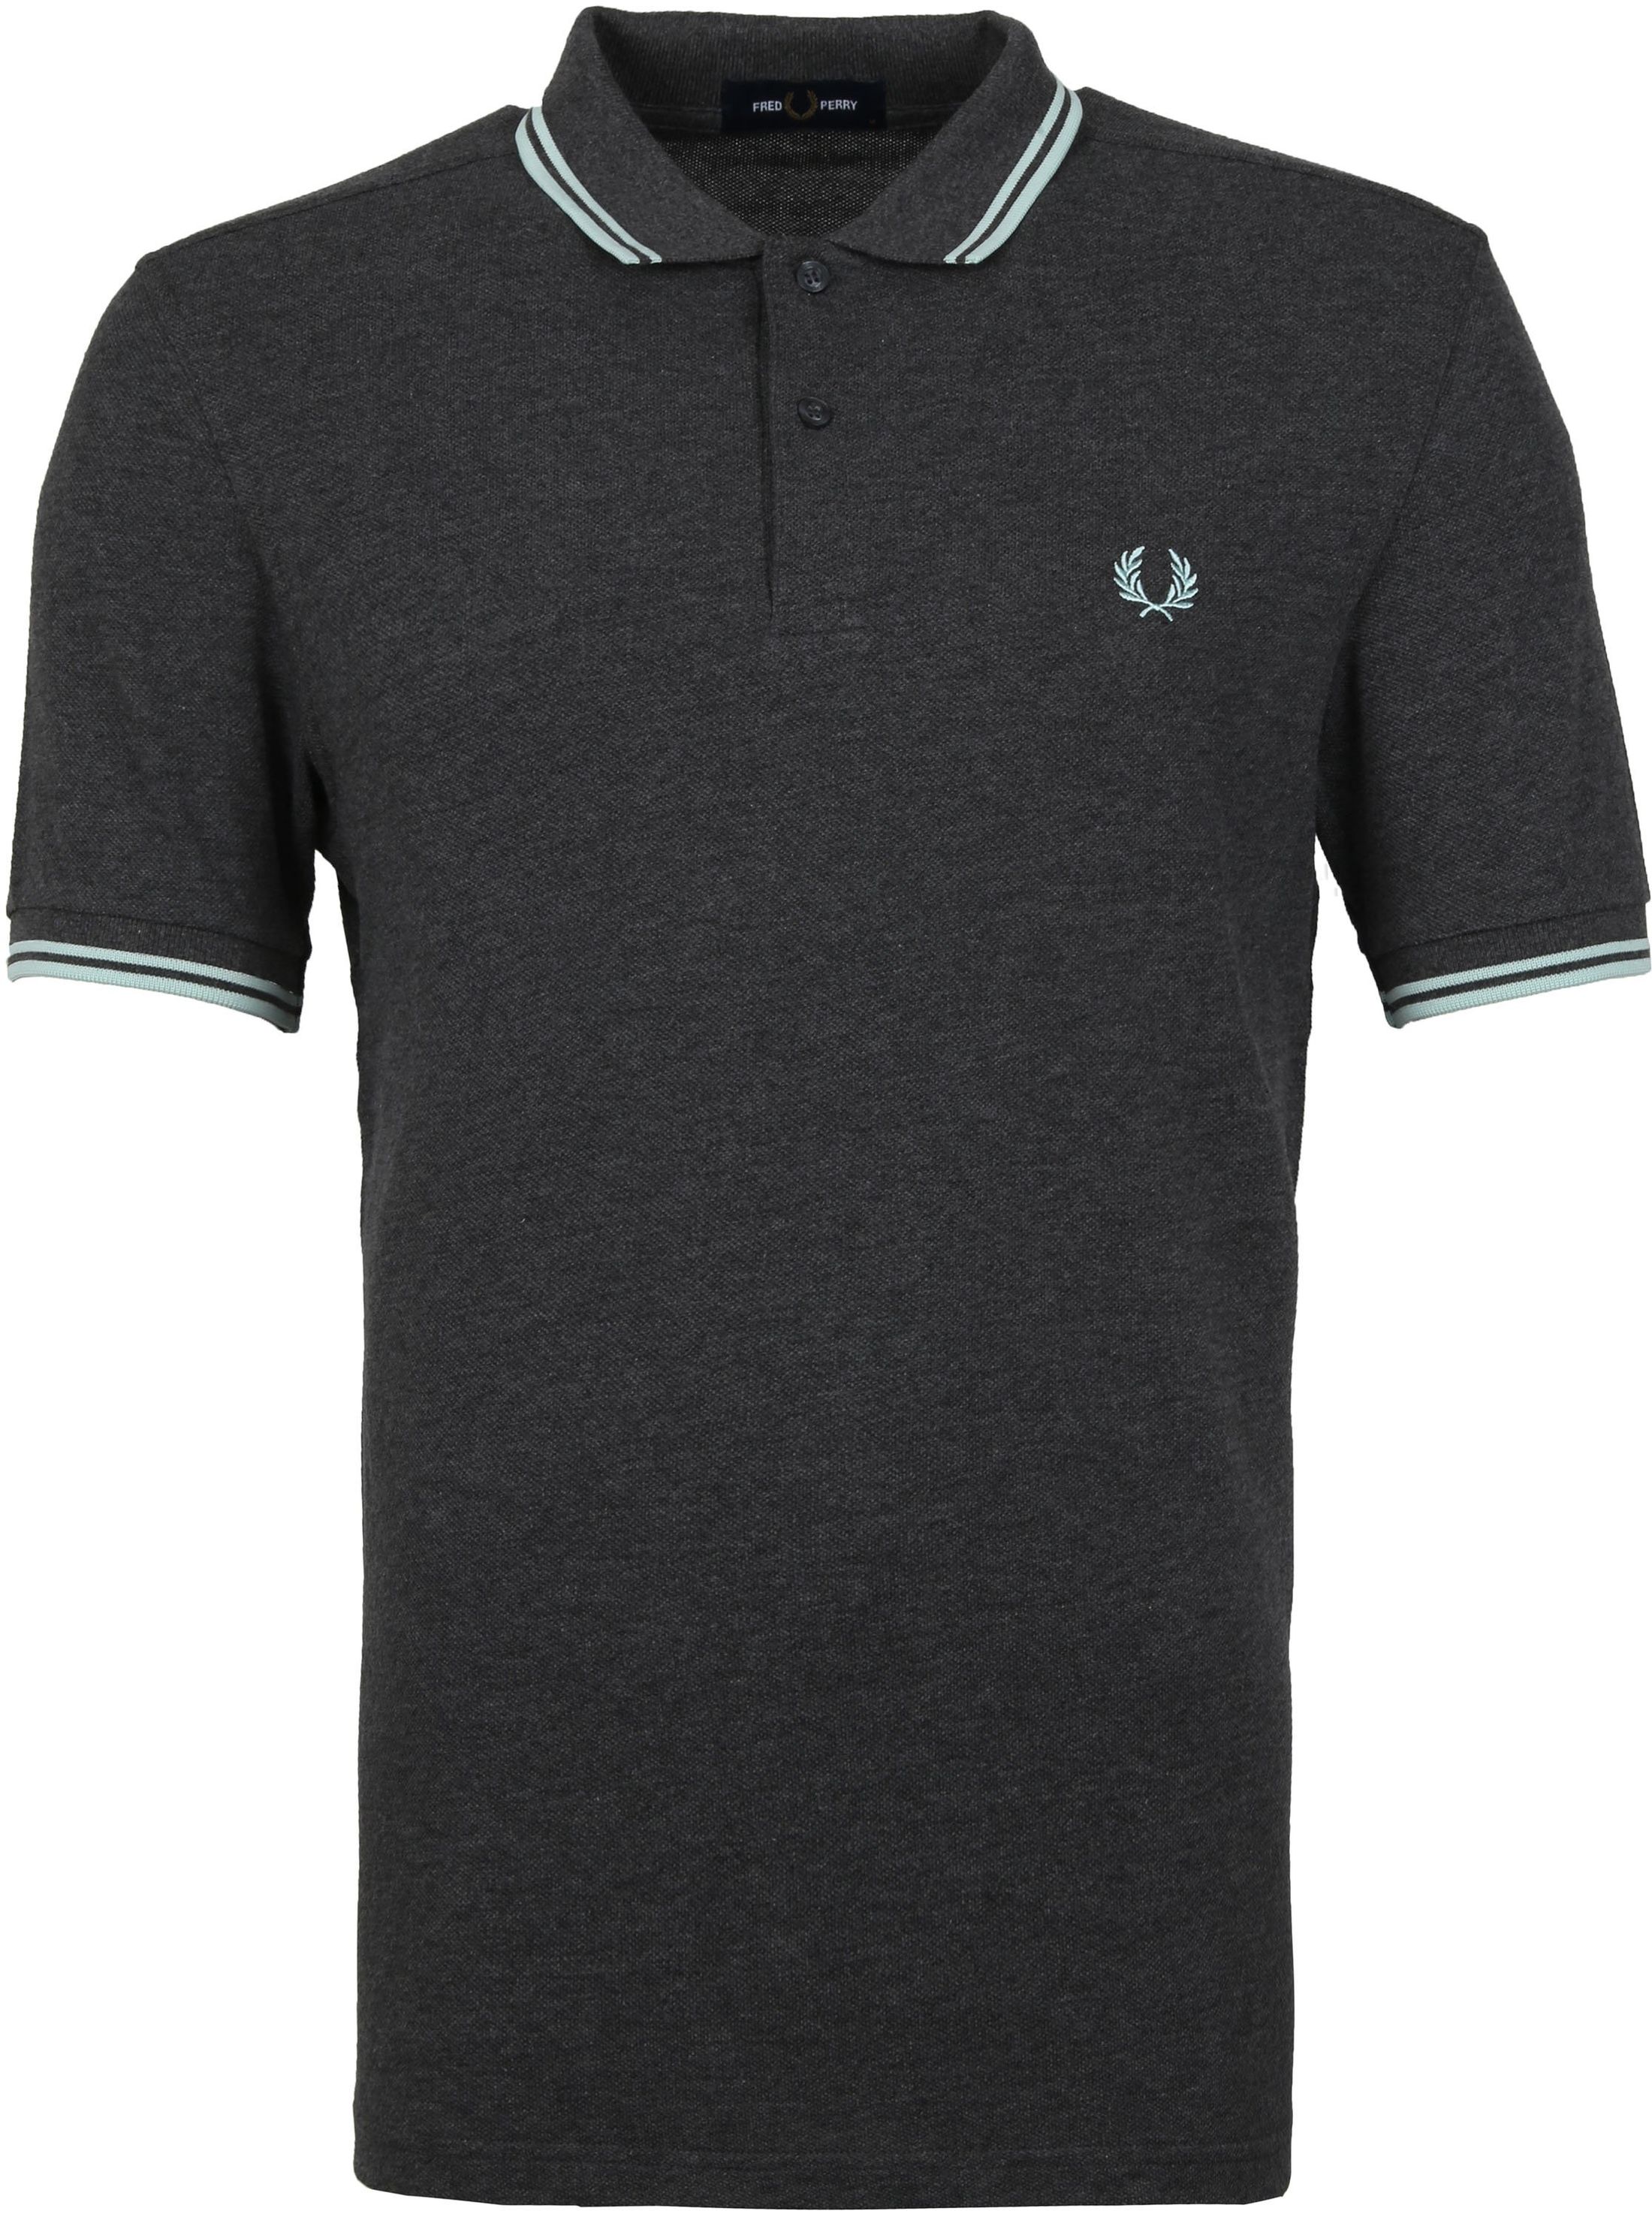 Fred Perry Polo Shirt M3600 Anthracite N49 Dark Grey Grey size XL